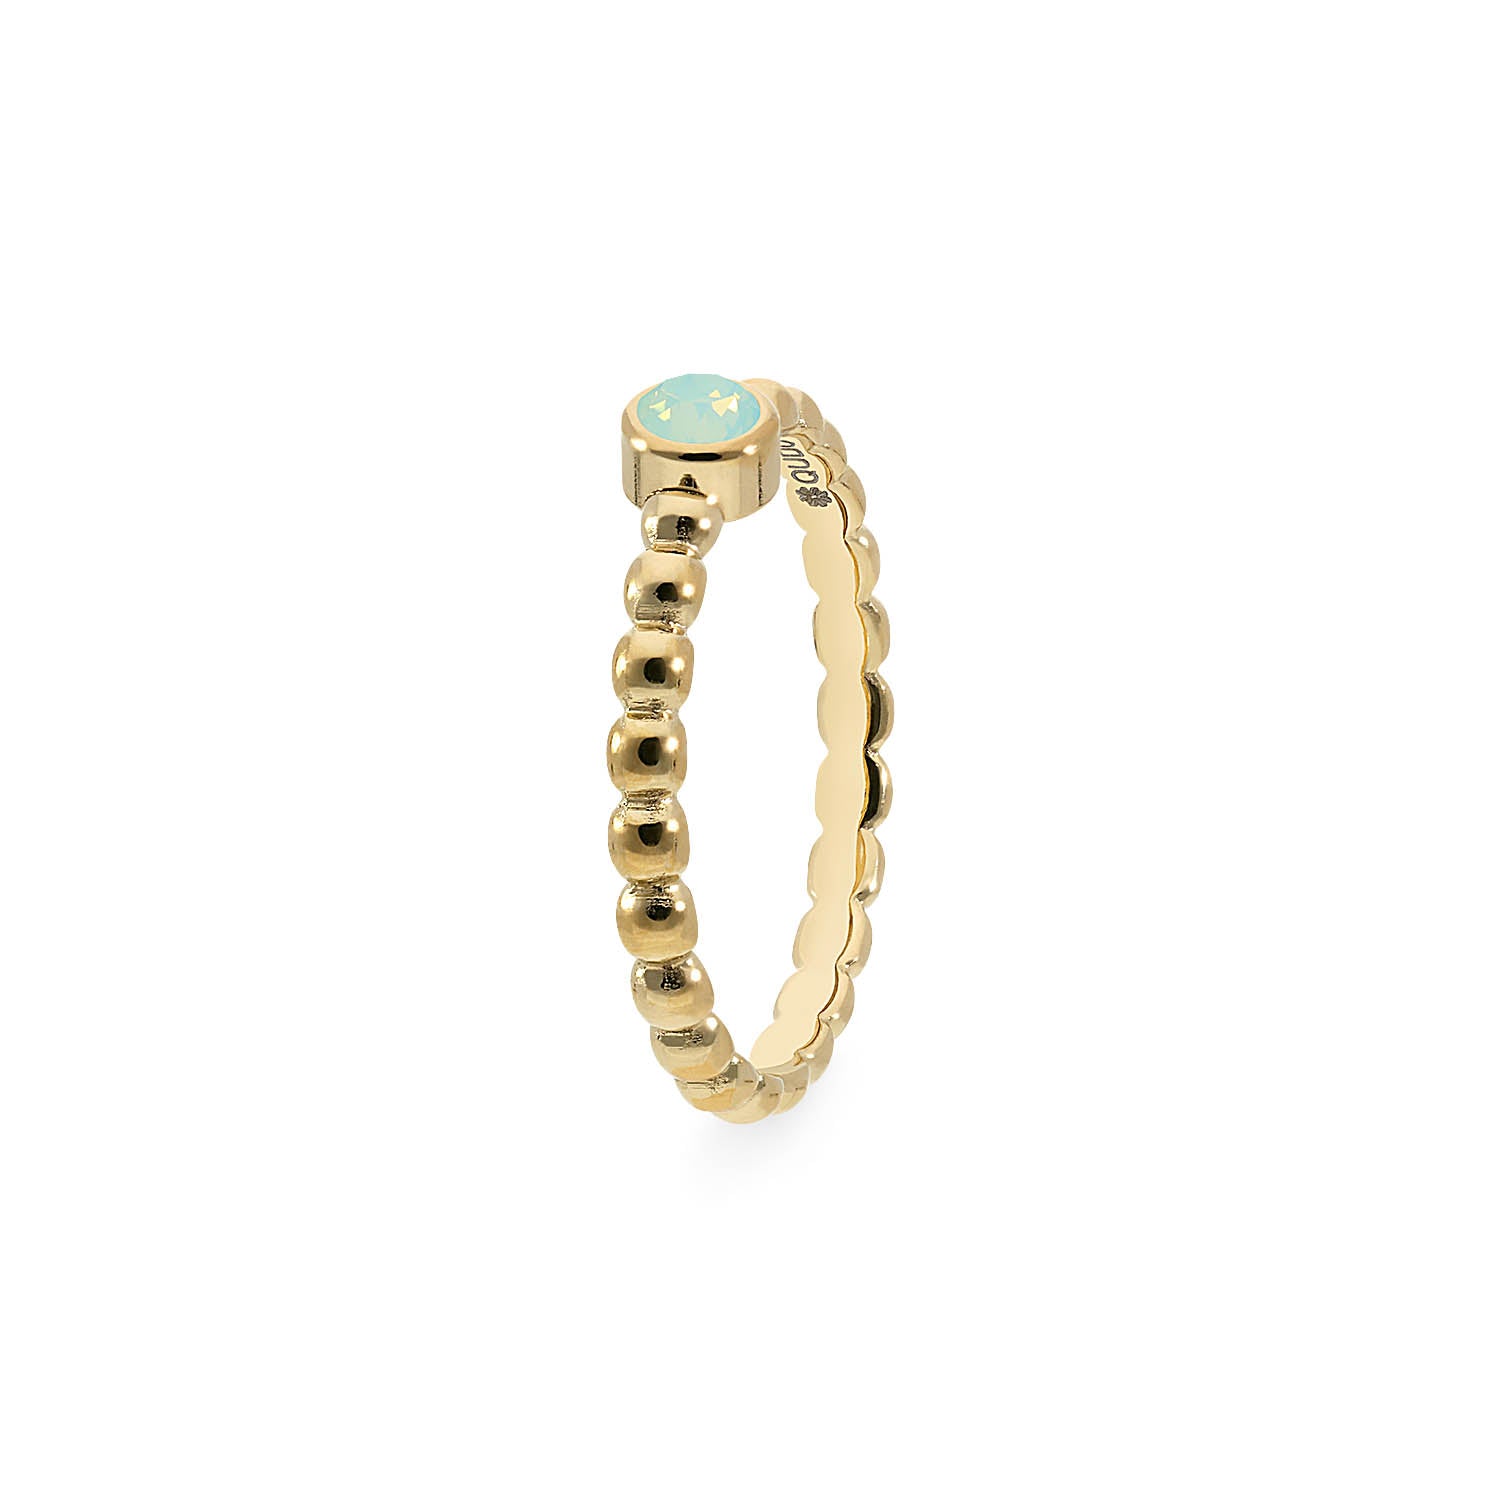 Spacer Ring Matino Deluxe - Gold